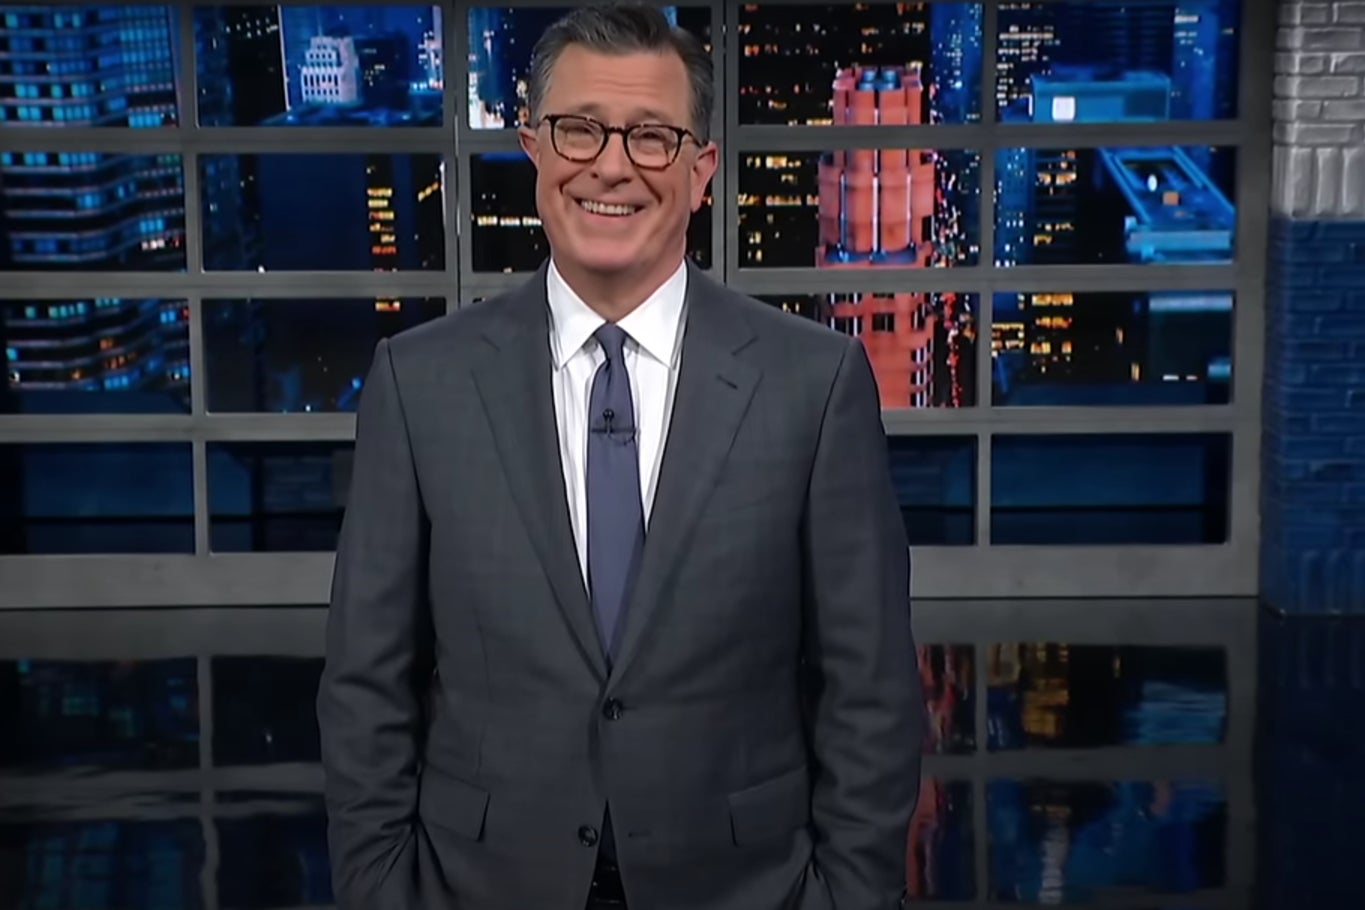 The Late Show host Stephen Colbert cracked up during his opening monologue on June 3 as his audience reacted to Donald Trump’蝉 conviction